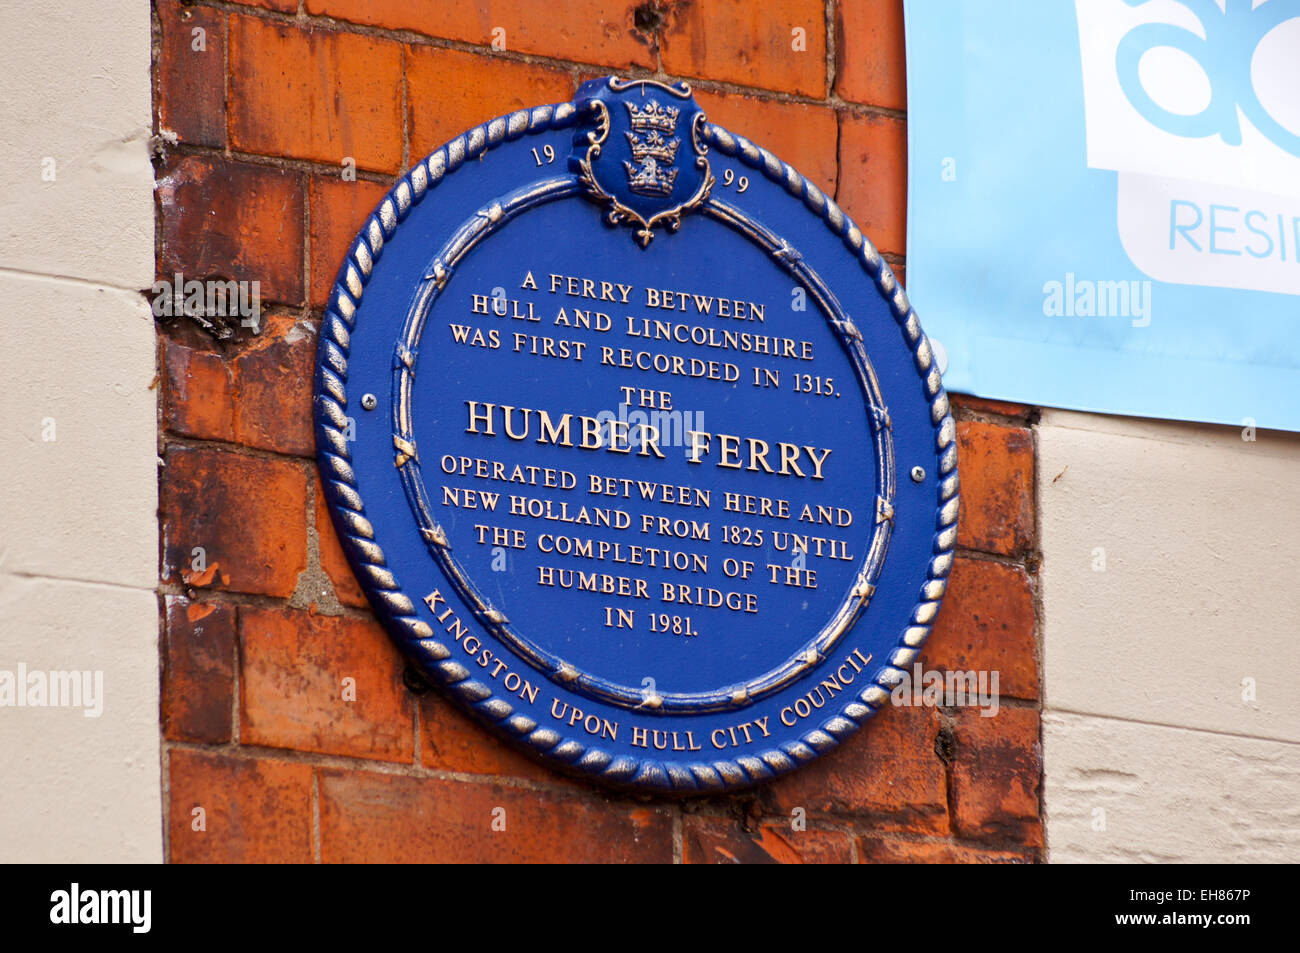 Historical plaque on the  Humber Ferry building, 1880, Kingston upon Hull, East Riding, Yorkshire, England Stock Photo